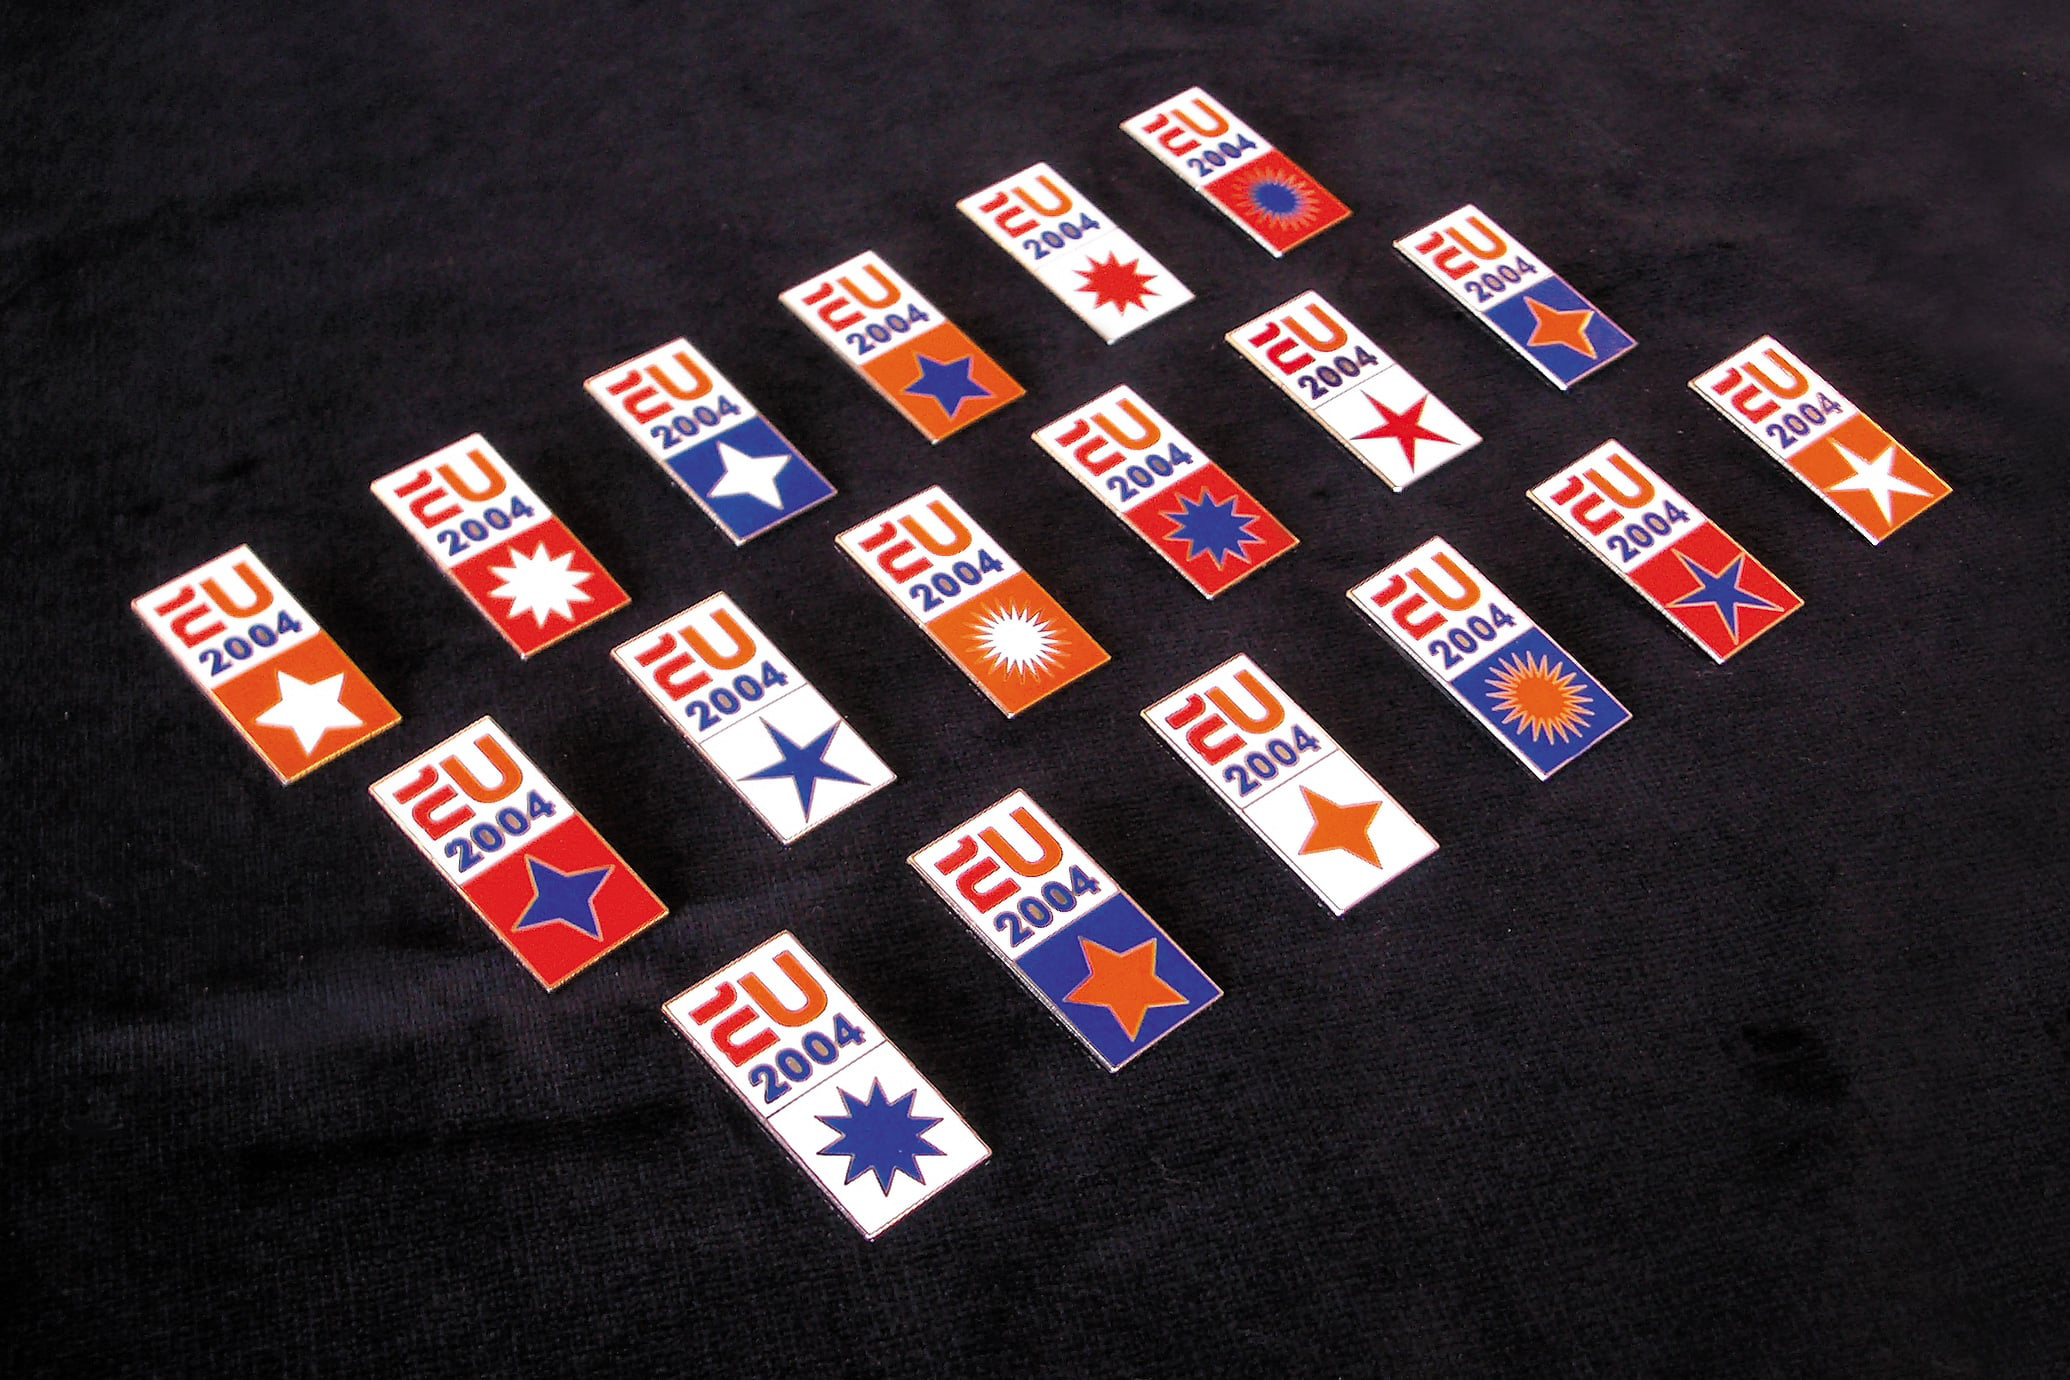 studio dumbar design visual brand identity for EUNL the European logo and event style for the Dutch Presidency of the European Union pin design 2004